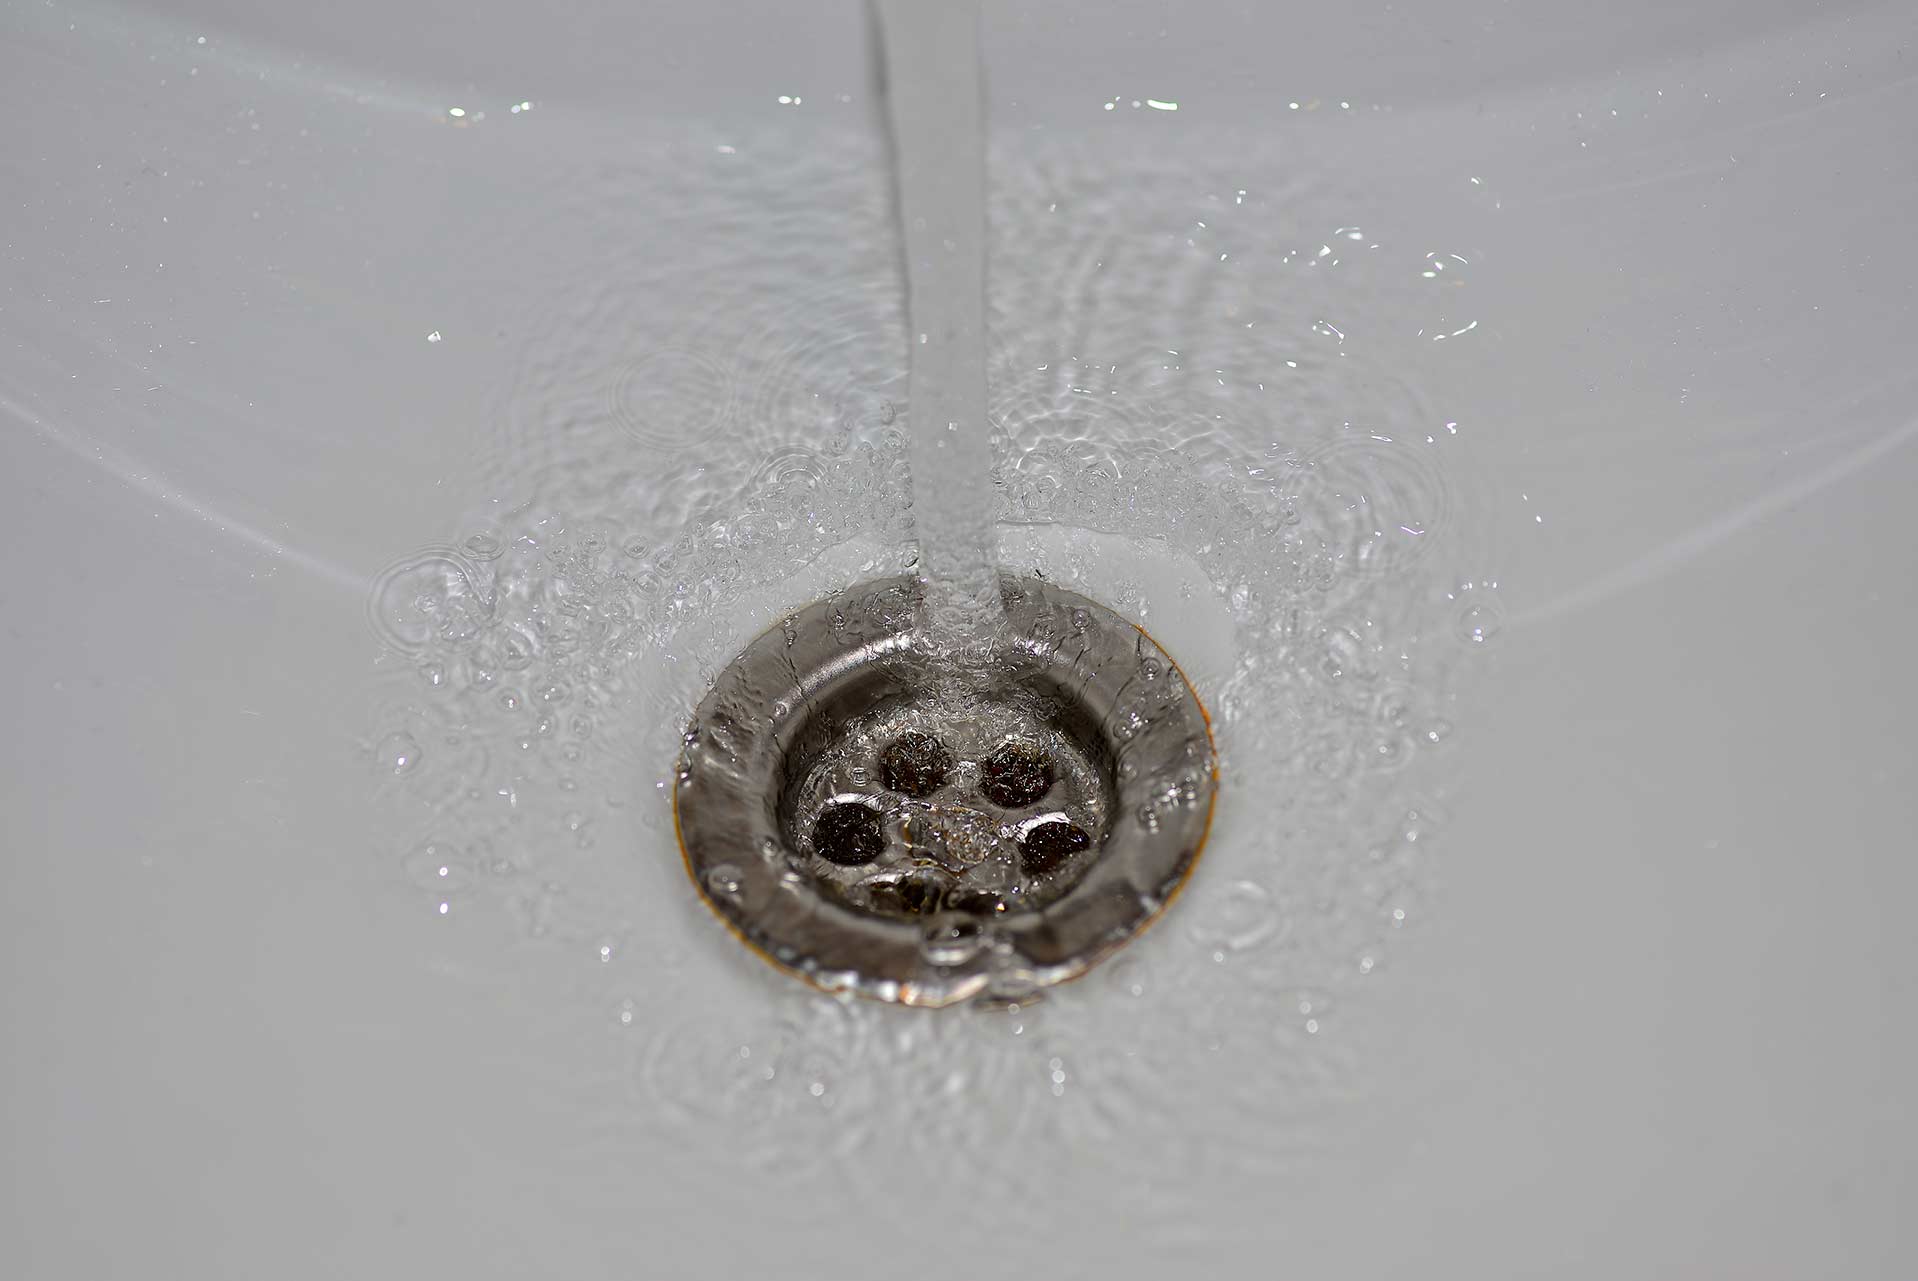 A2B Drains provides services to unblock blocked sinks and drains for properties in Gillingham.